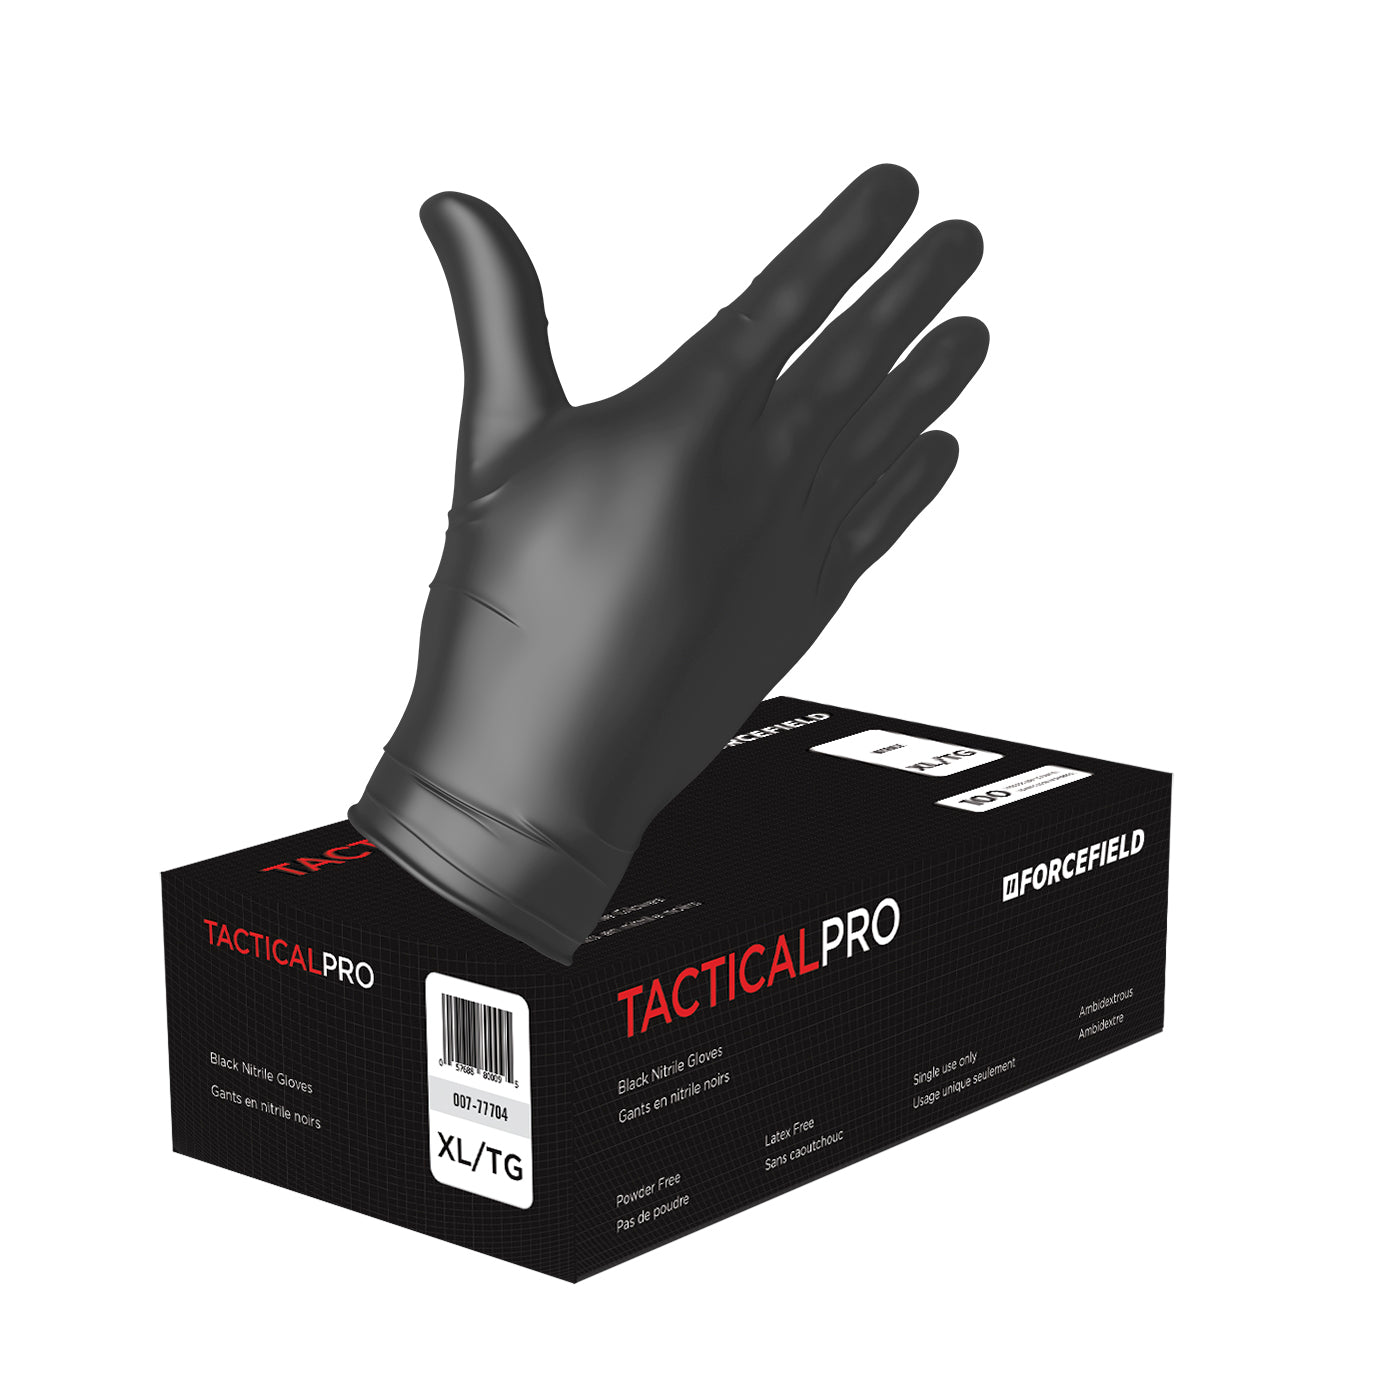 Tactical Pro Nitrile Disposable Gloves (Case of 1000 Gloves)